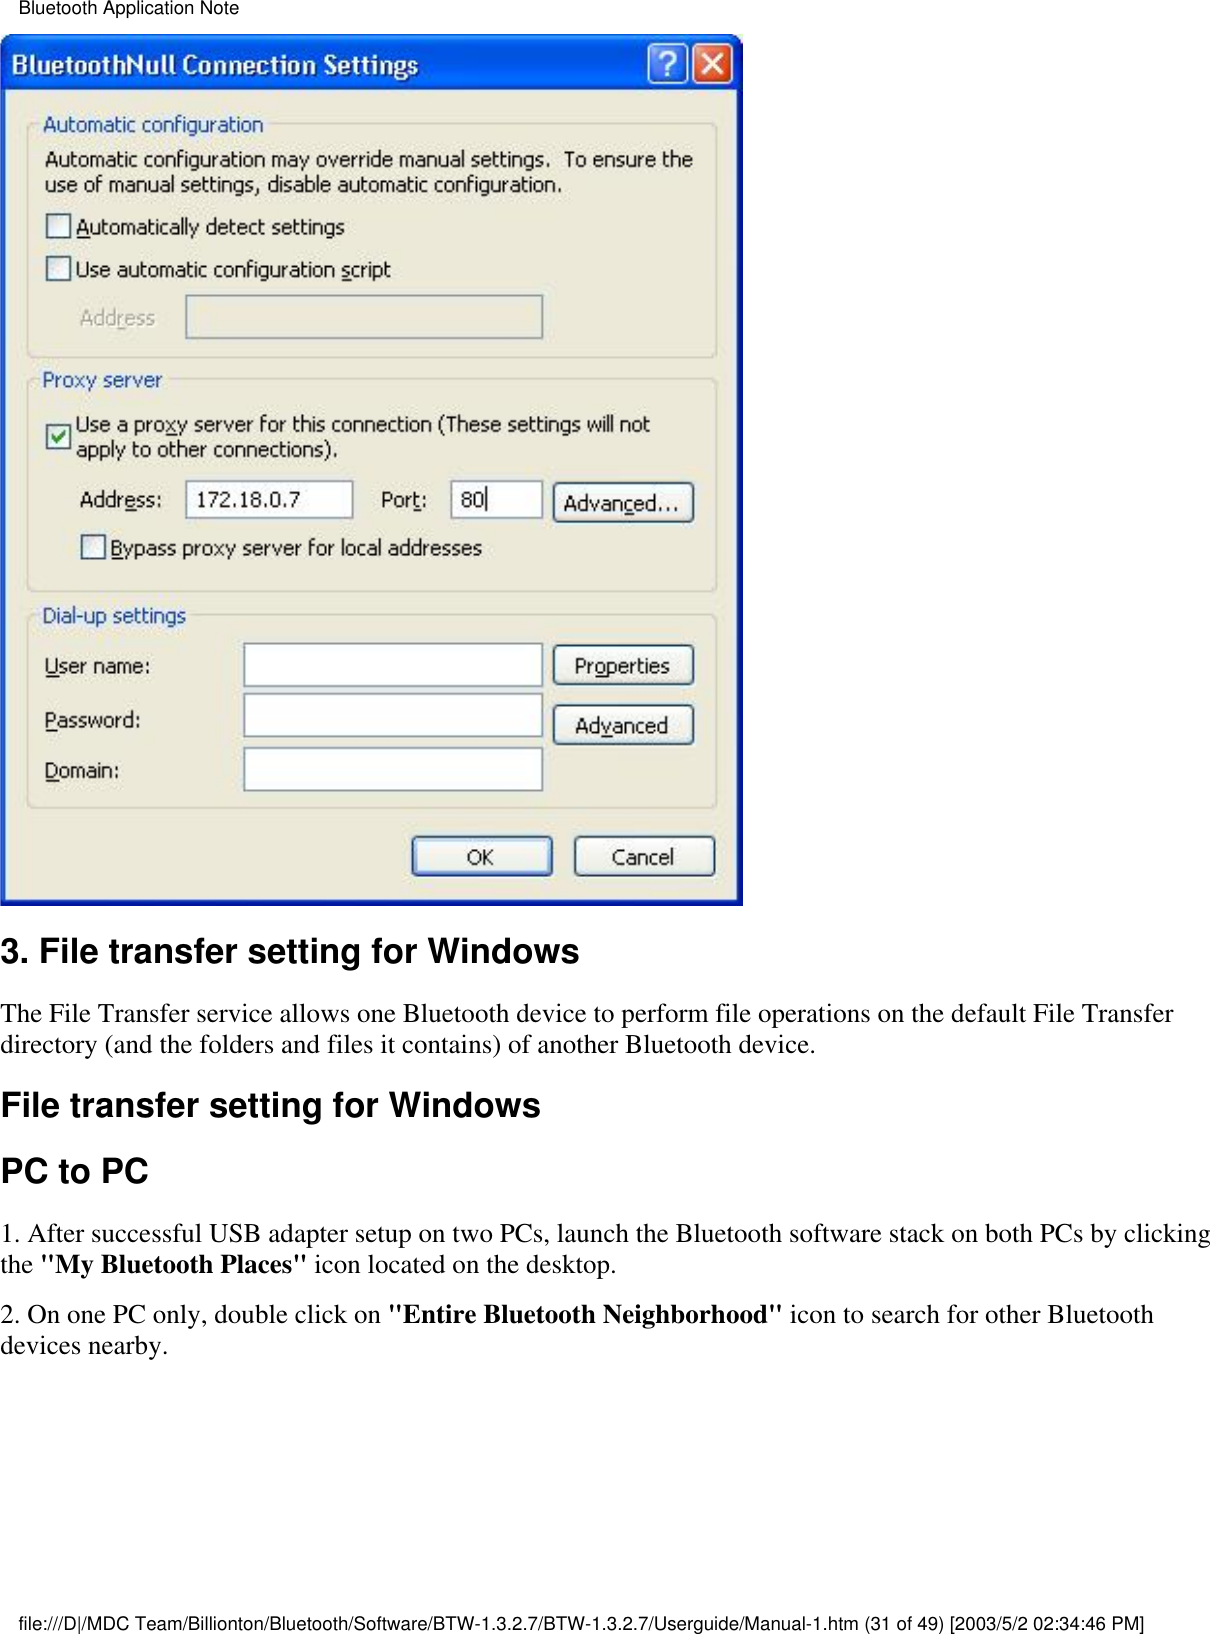 3. File transfer setting for WindowsThe File Transfer service allows one Bluetooth device to perform file operations on the default File Transferdirectory (and the folders and files it contains) of another Bluetooth device.File transfer setting for WindowsPC to PC1. After successful USB adapter setup on two PCs, launch the Bluetooth software stack on both PCs by clickingthe &quot;My Bluetooth Places&quot; icon located on the desktop.2. On one PC only, double click on &quot;Entire Bluetooth Neighborhood&quot; icon to search for other Bluetoothdevices nearby.Bluetooth Application Notefile:///D|/MDC Team/Billionton/Bluetooth/Software/BTW-1.3.2.7/BTW-1.3.2.7/Userguide/Manual-1.htm (31 of 49) [2003/5/2 02:34:46 PM]